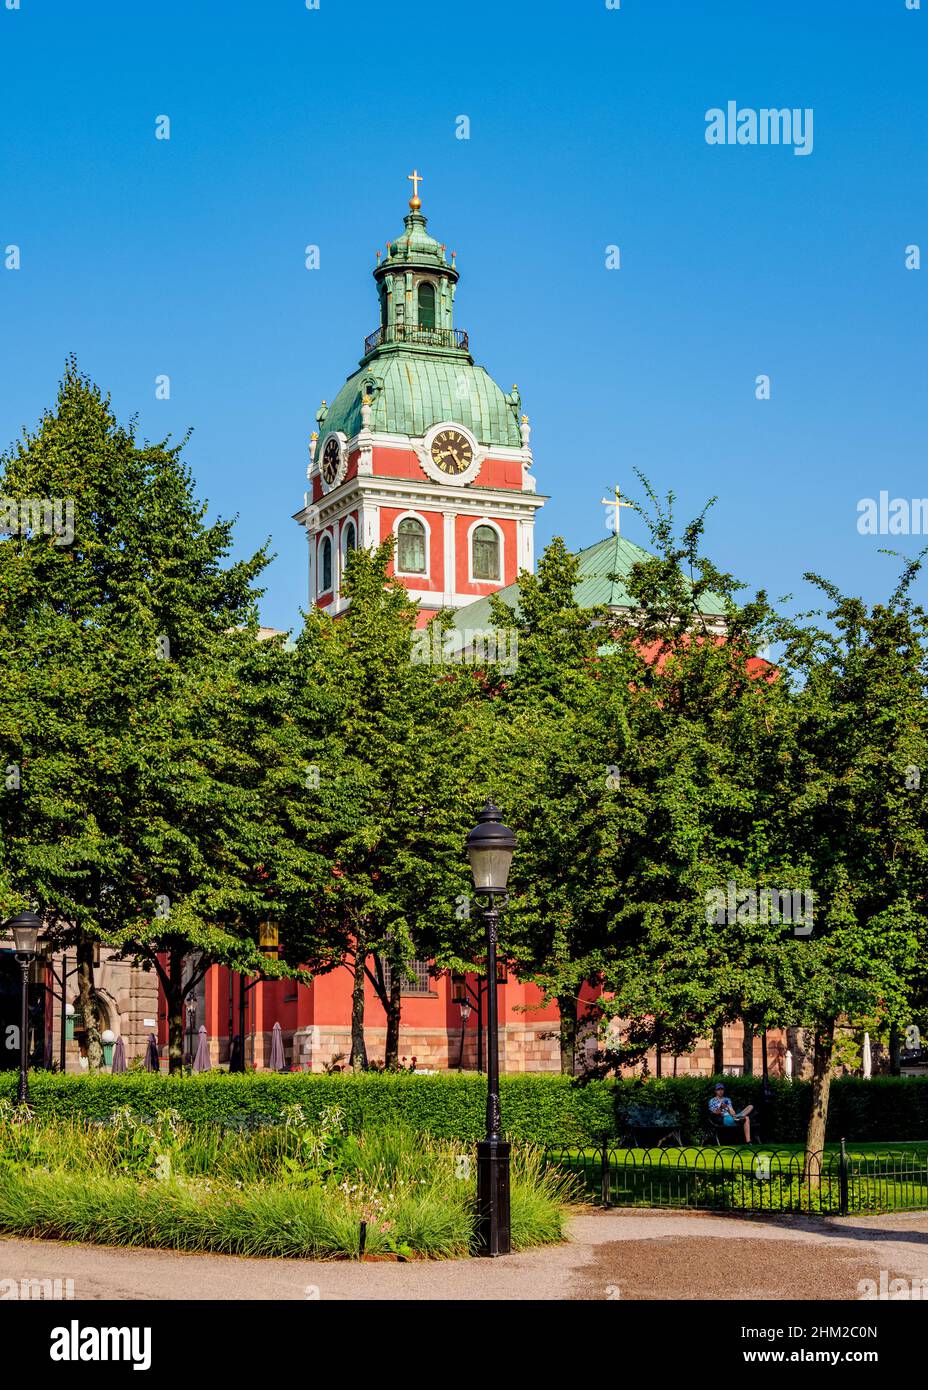 Kungstradgarden Park and St. Jacobs Church, Stockholm, Stockholm County, Sweden Stock Photo